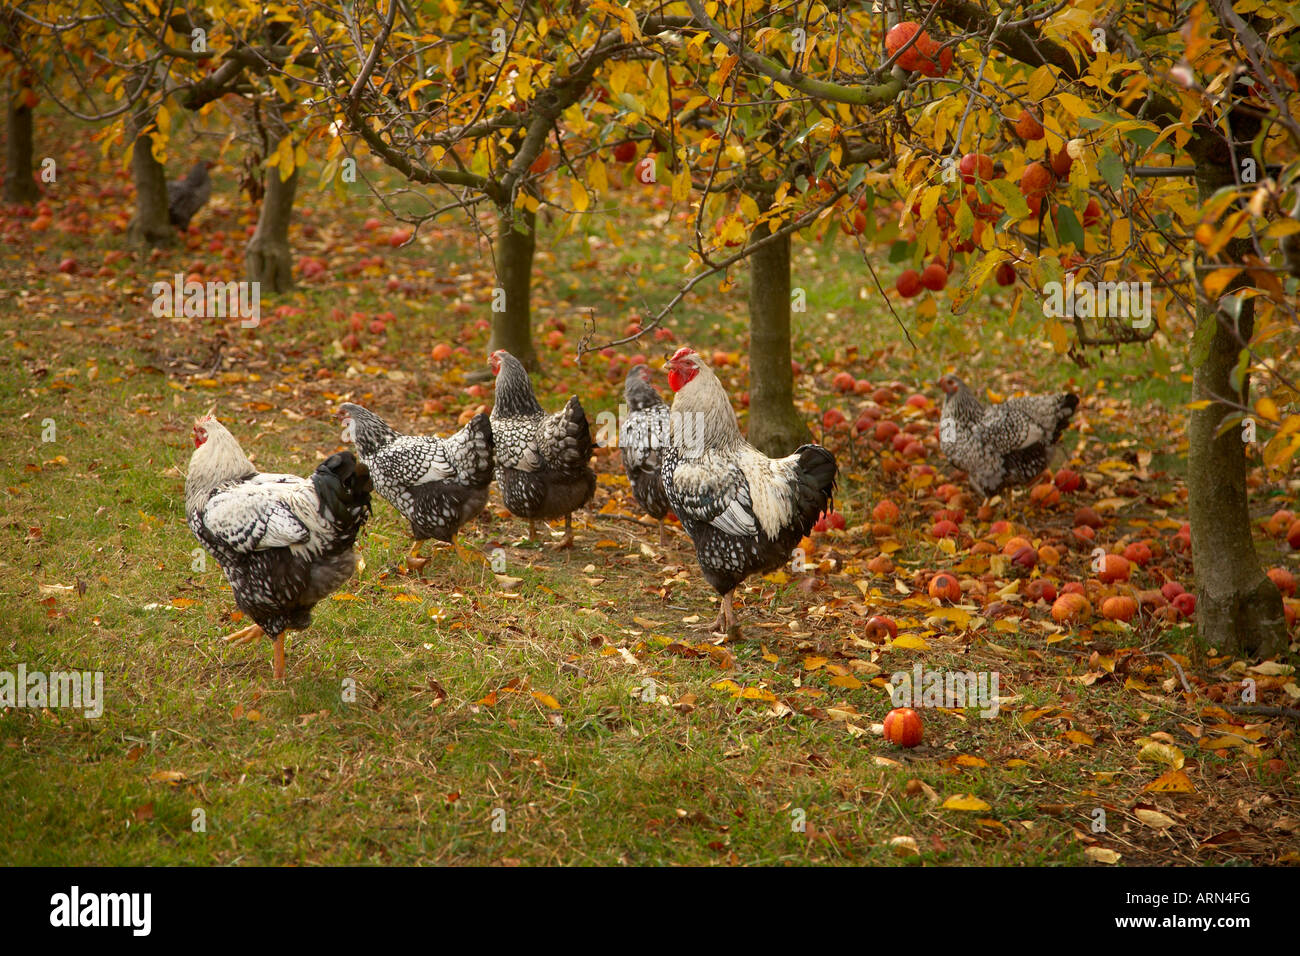 silver laced wyndottes roosters and hen chicken freeranging in orchard Stock Photo